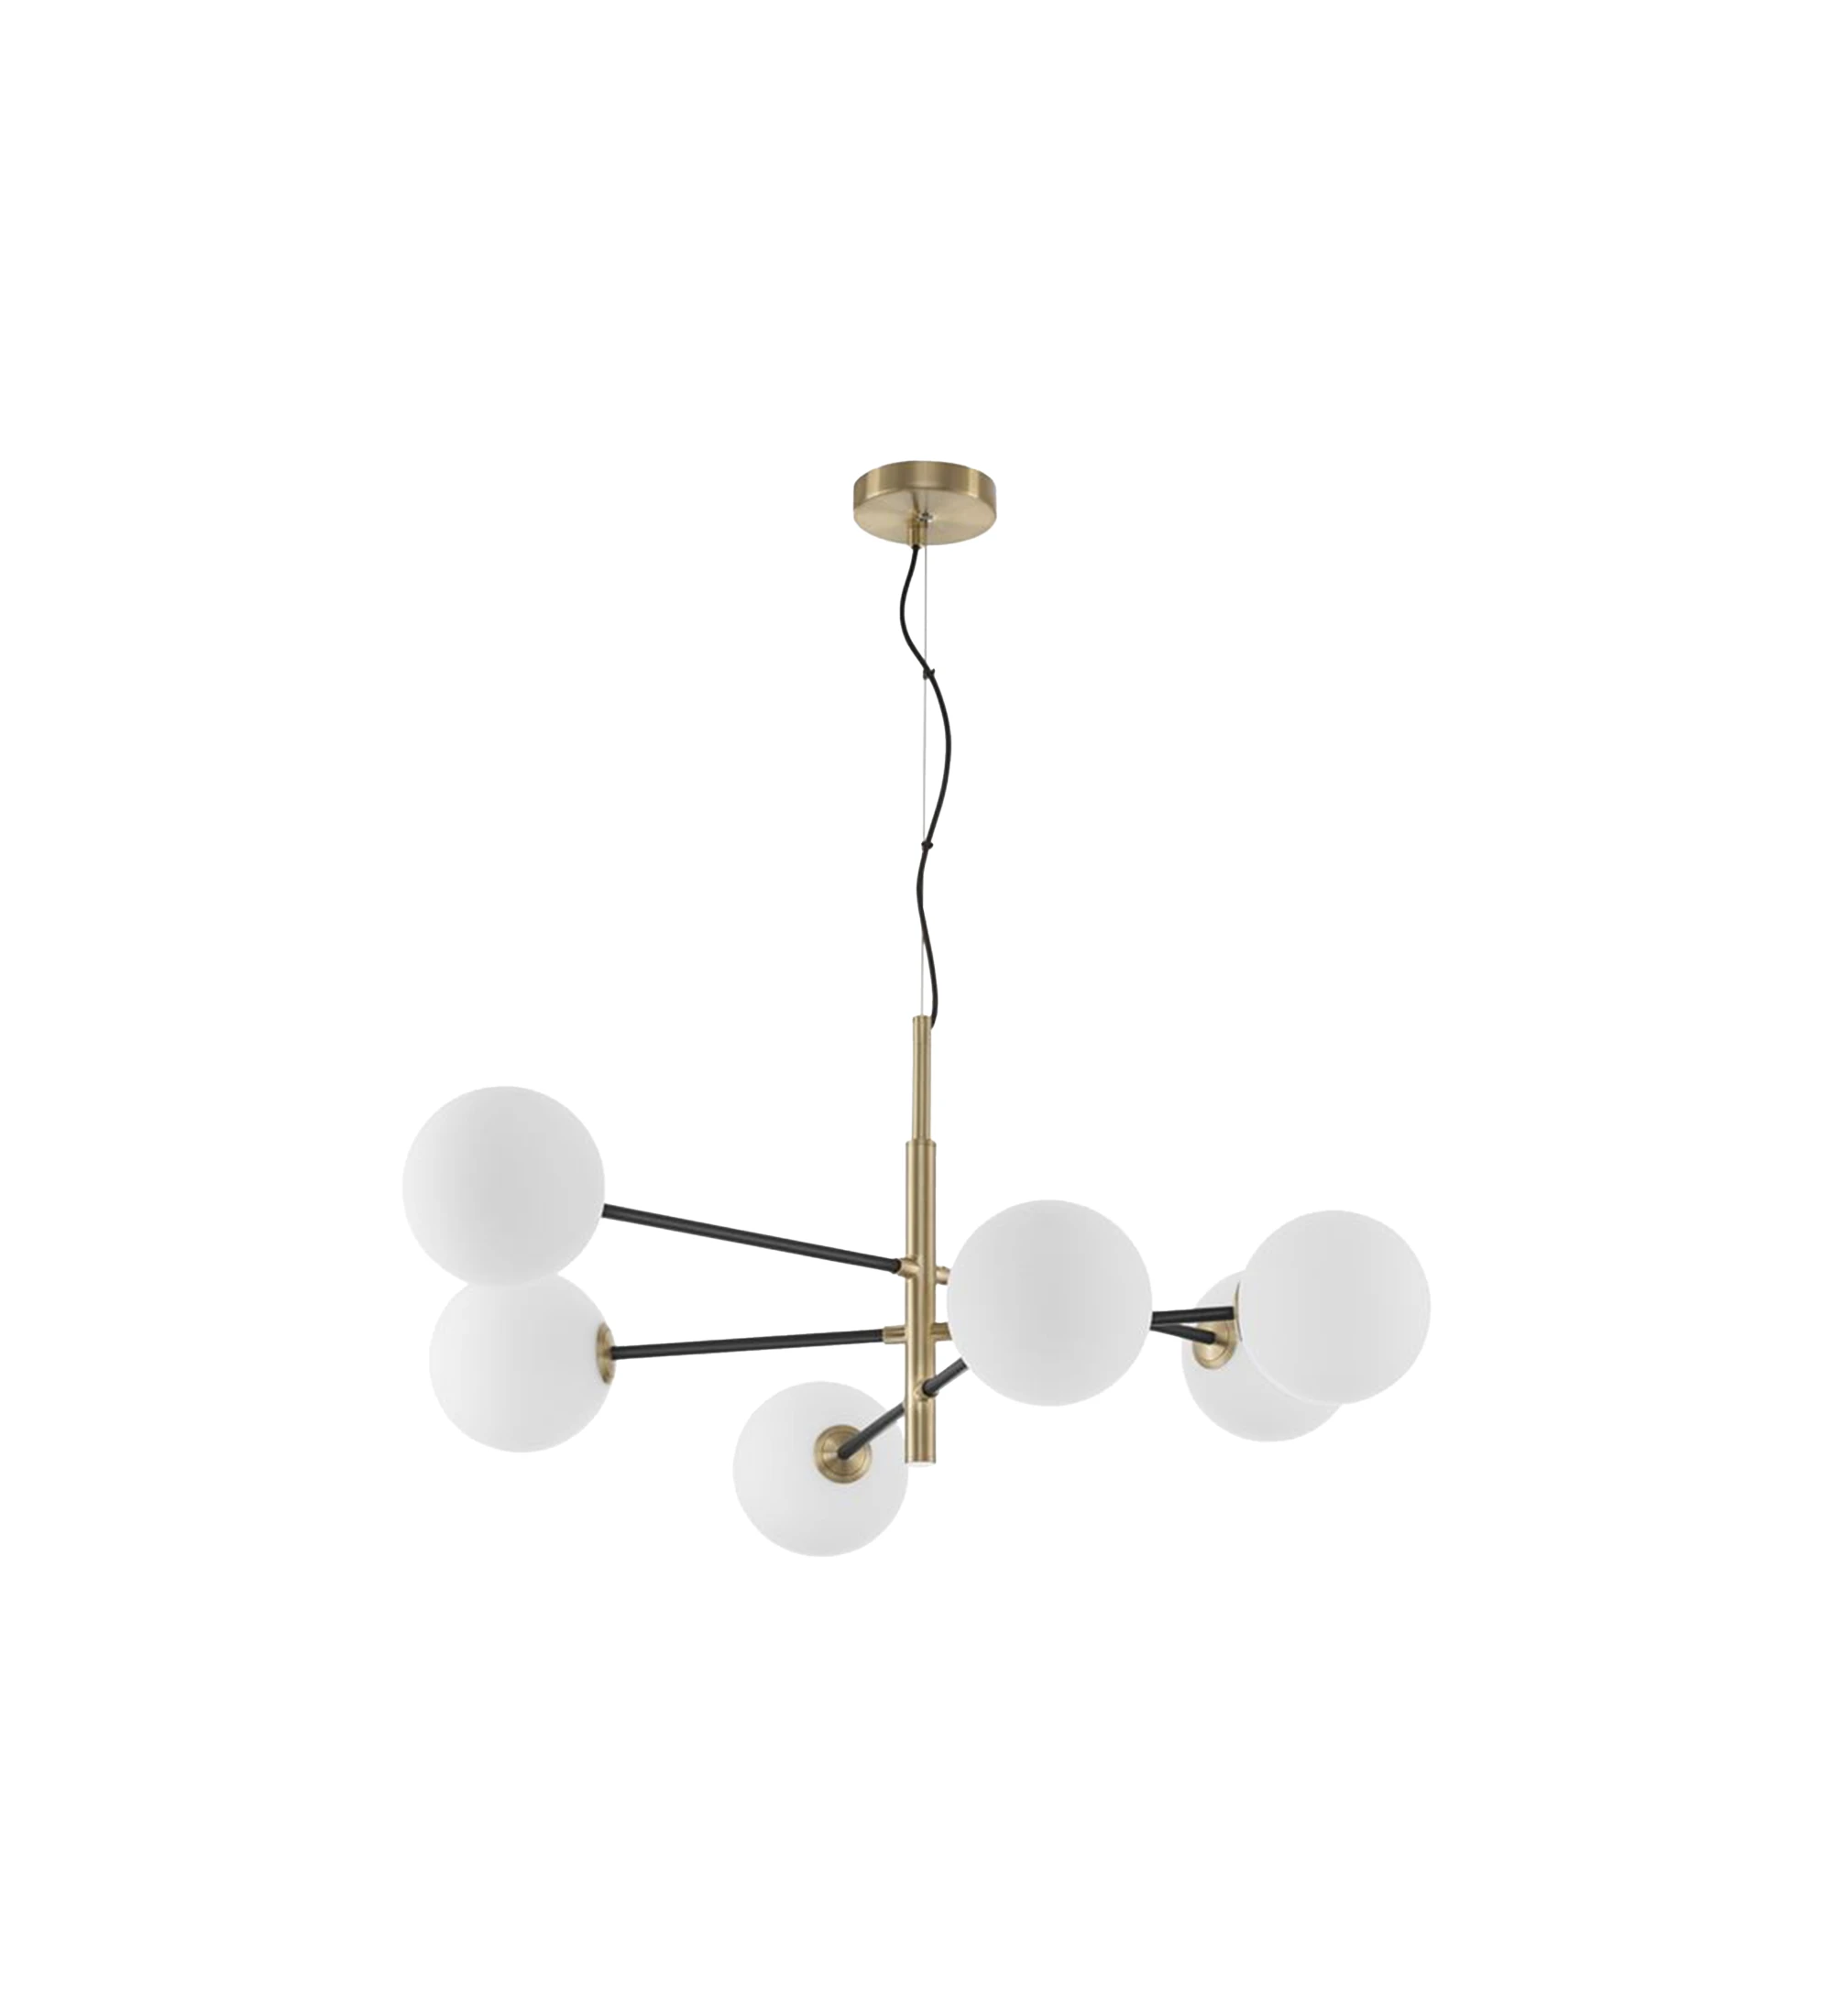  Suspension Lamp in satin gold, black metal and white opal glass.